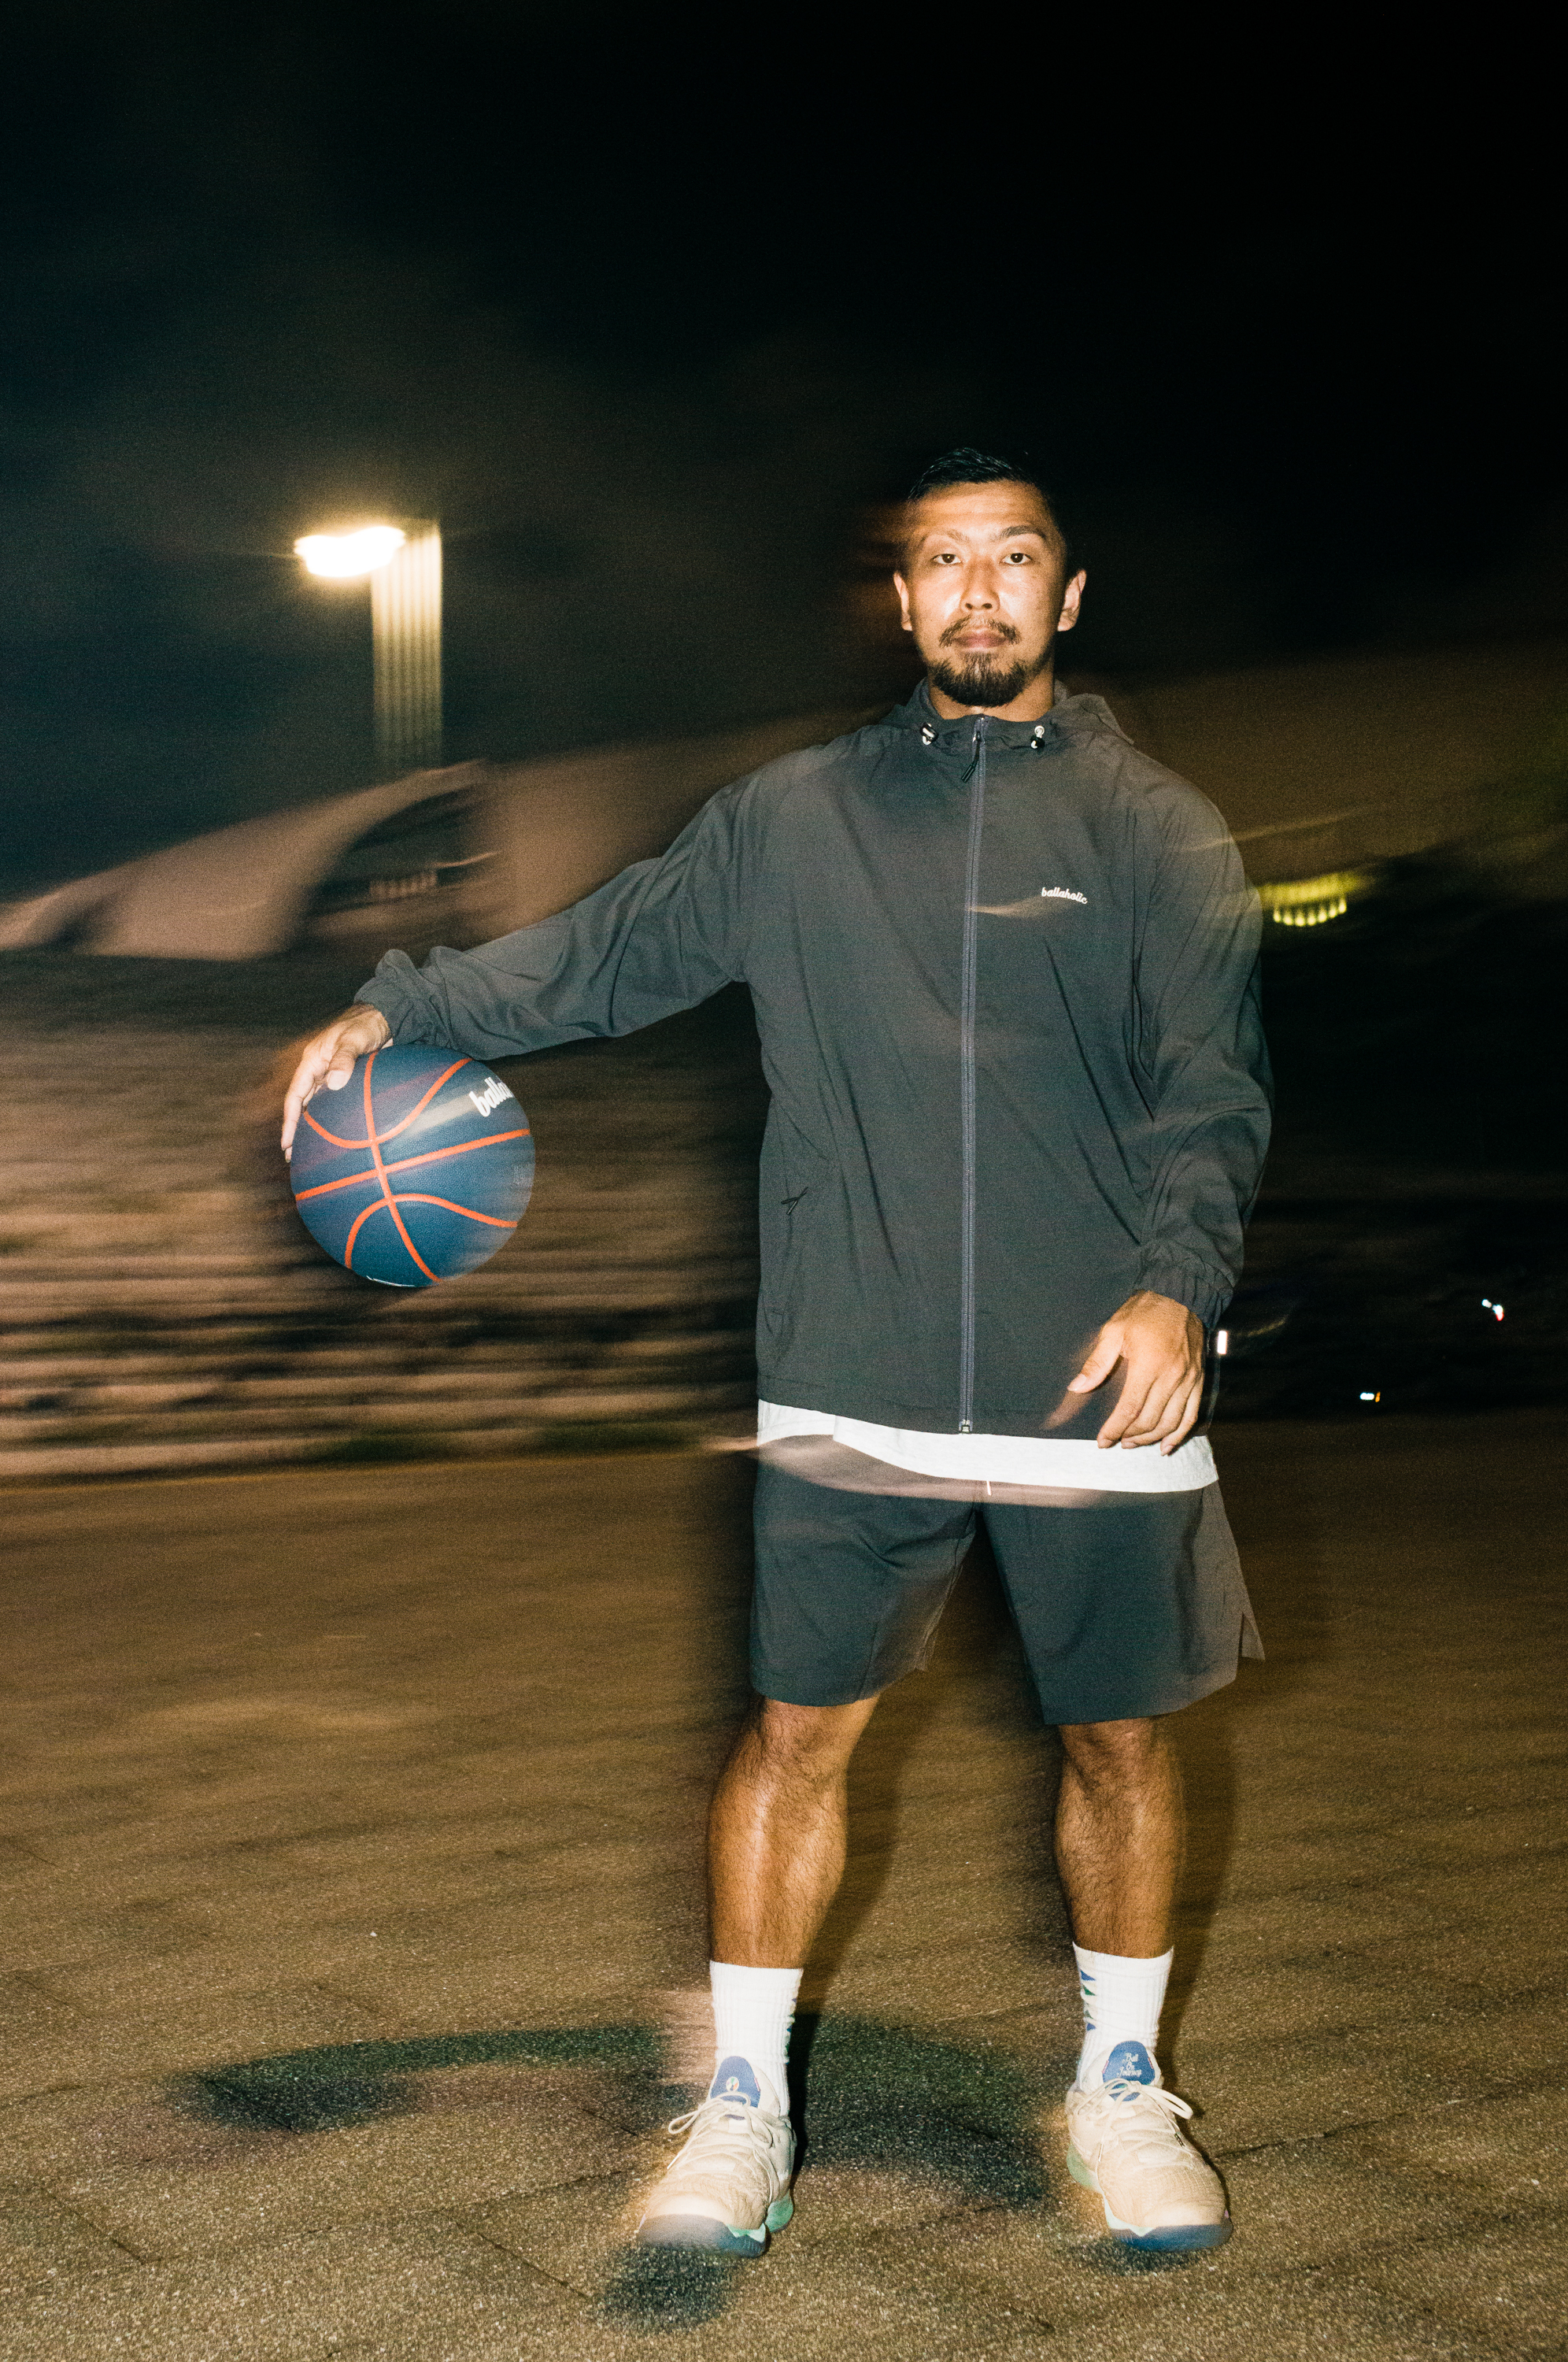 ballaholic BLHLC ANYWHERE Full Zip